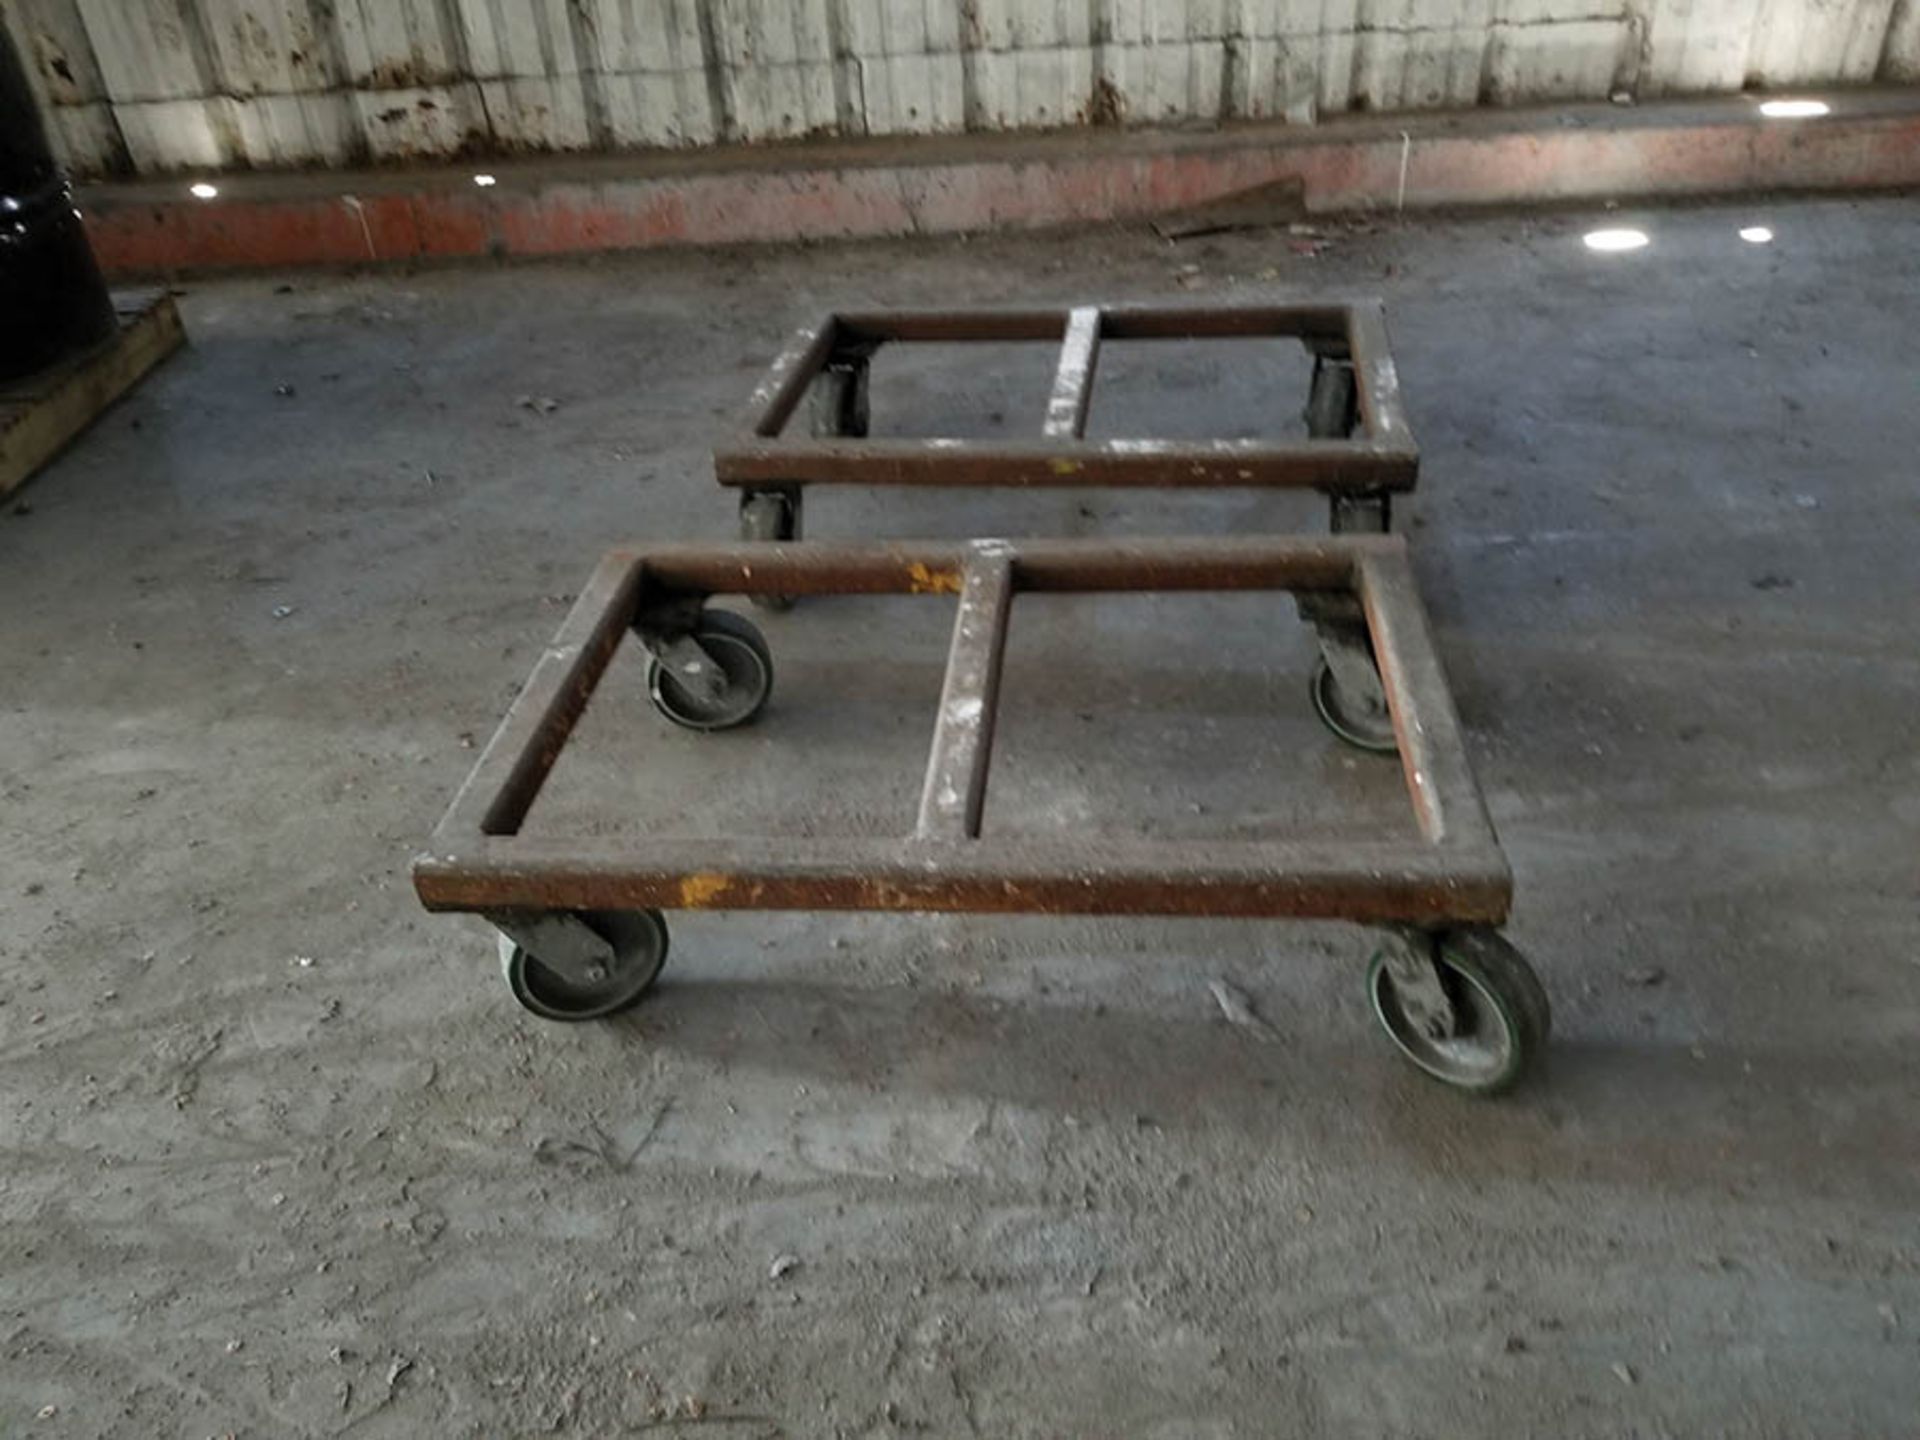 MISC. CARTS THROUGHOUT BUILDING, (4) STEEL FLAT BAR WITH CASTERS, RUBBER MAIDS AND METAL CARTS - Image 2 of 2